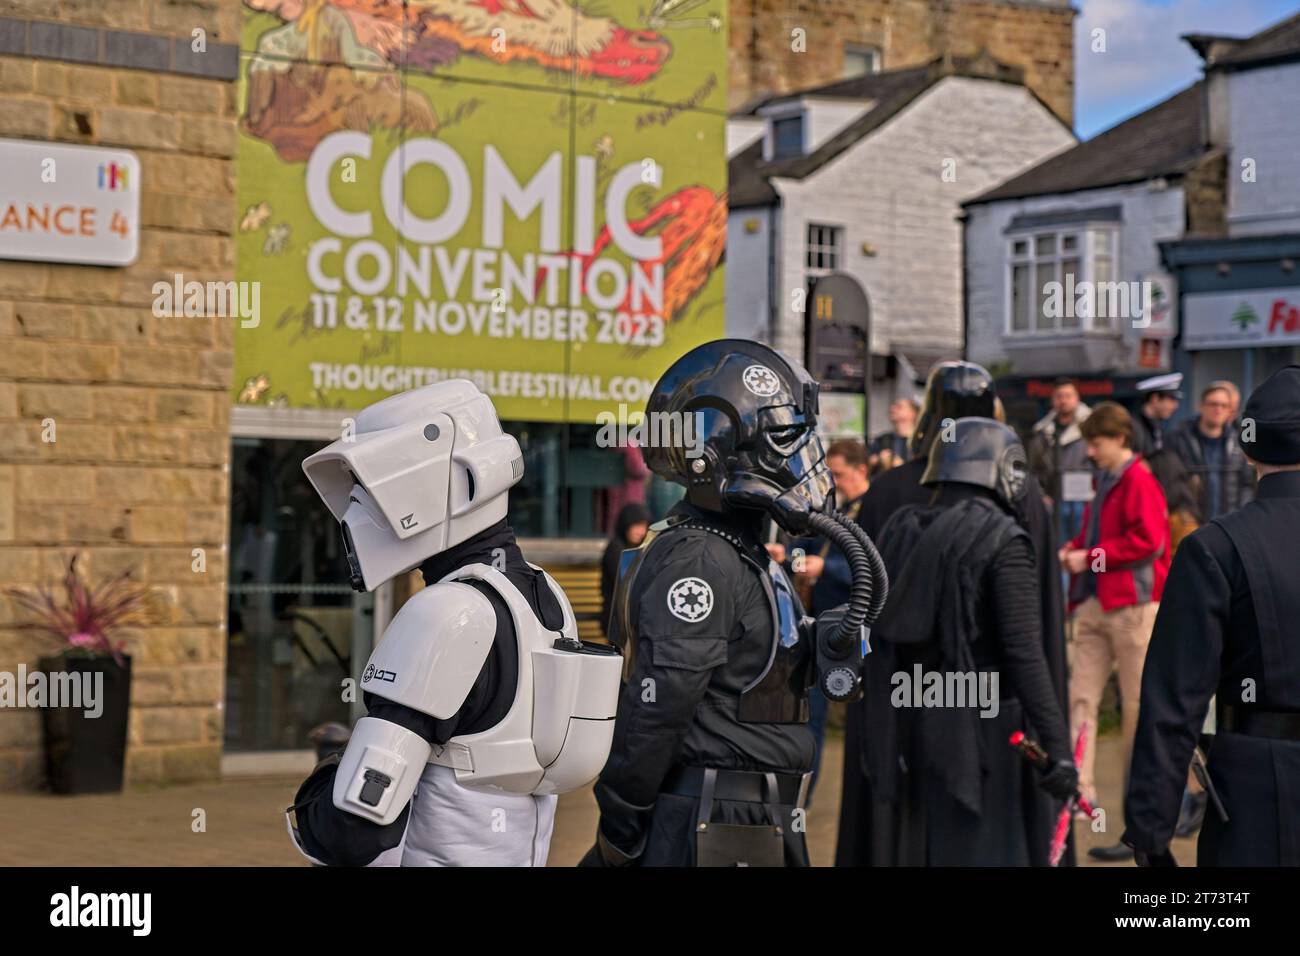 Two cosplayers, dressed as a Stormtrooper and an Imperial Tie Fighter Pilot, greeted visitors as they entered the Comic Convention, Harrogate, UK. Stock Photo